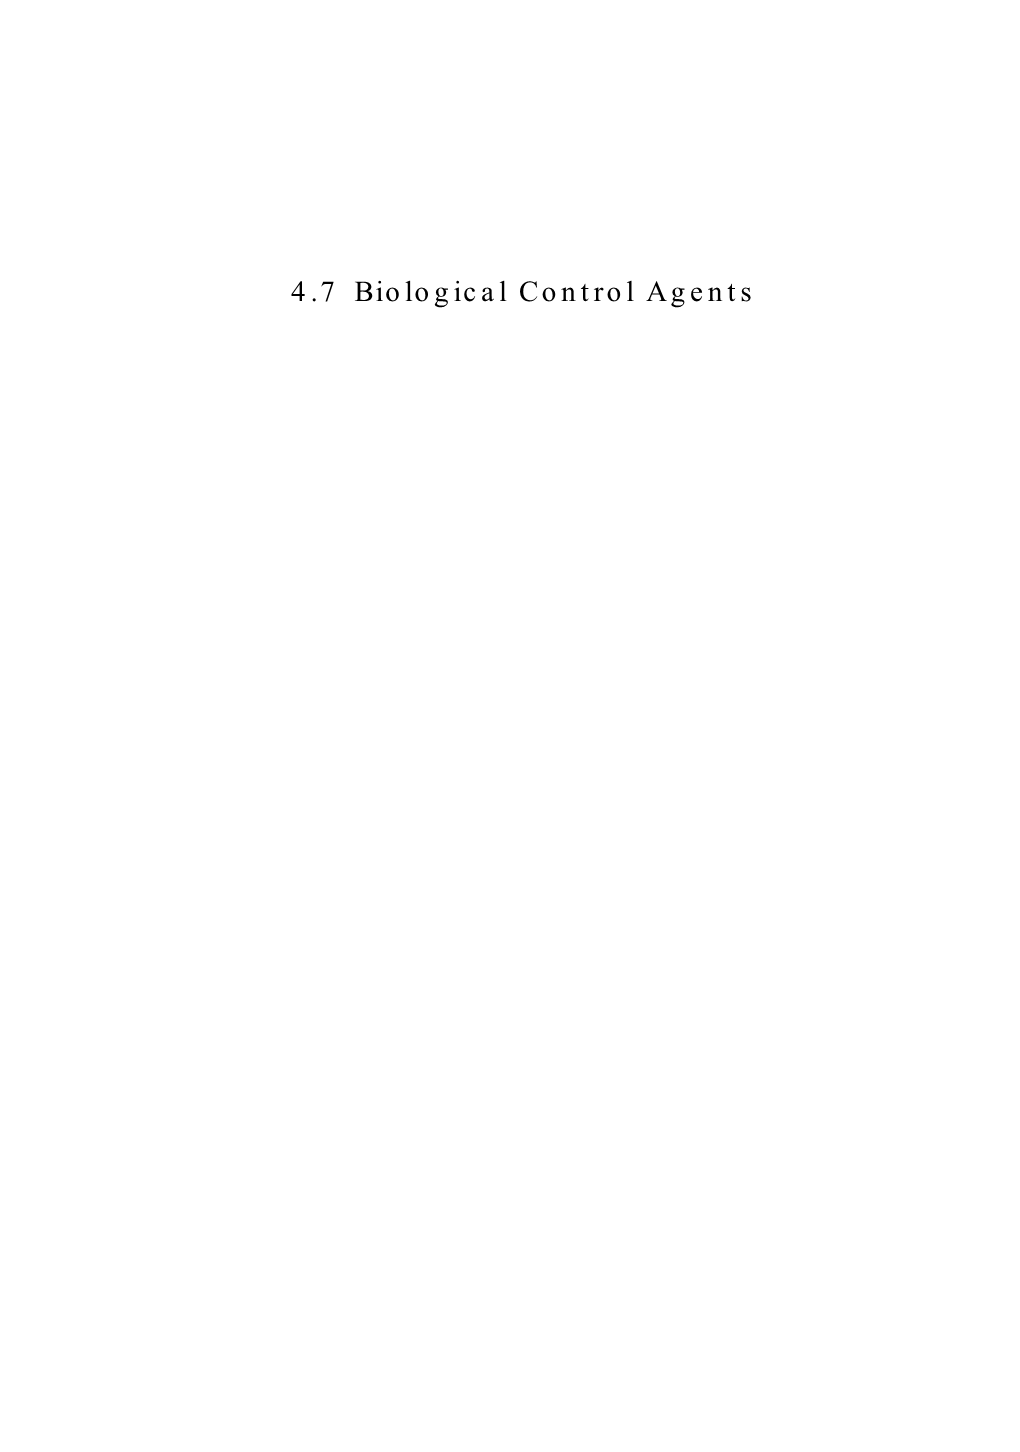 Field Guide to the Biological Control of Weeds in British Columbia